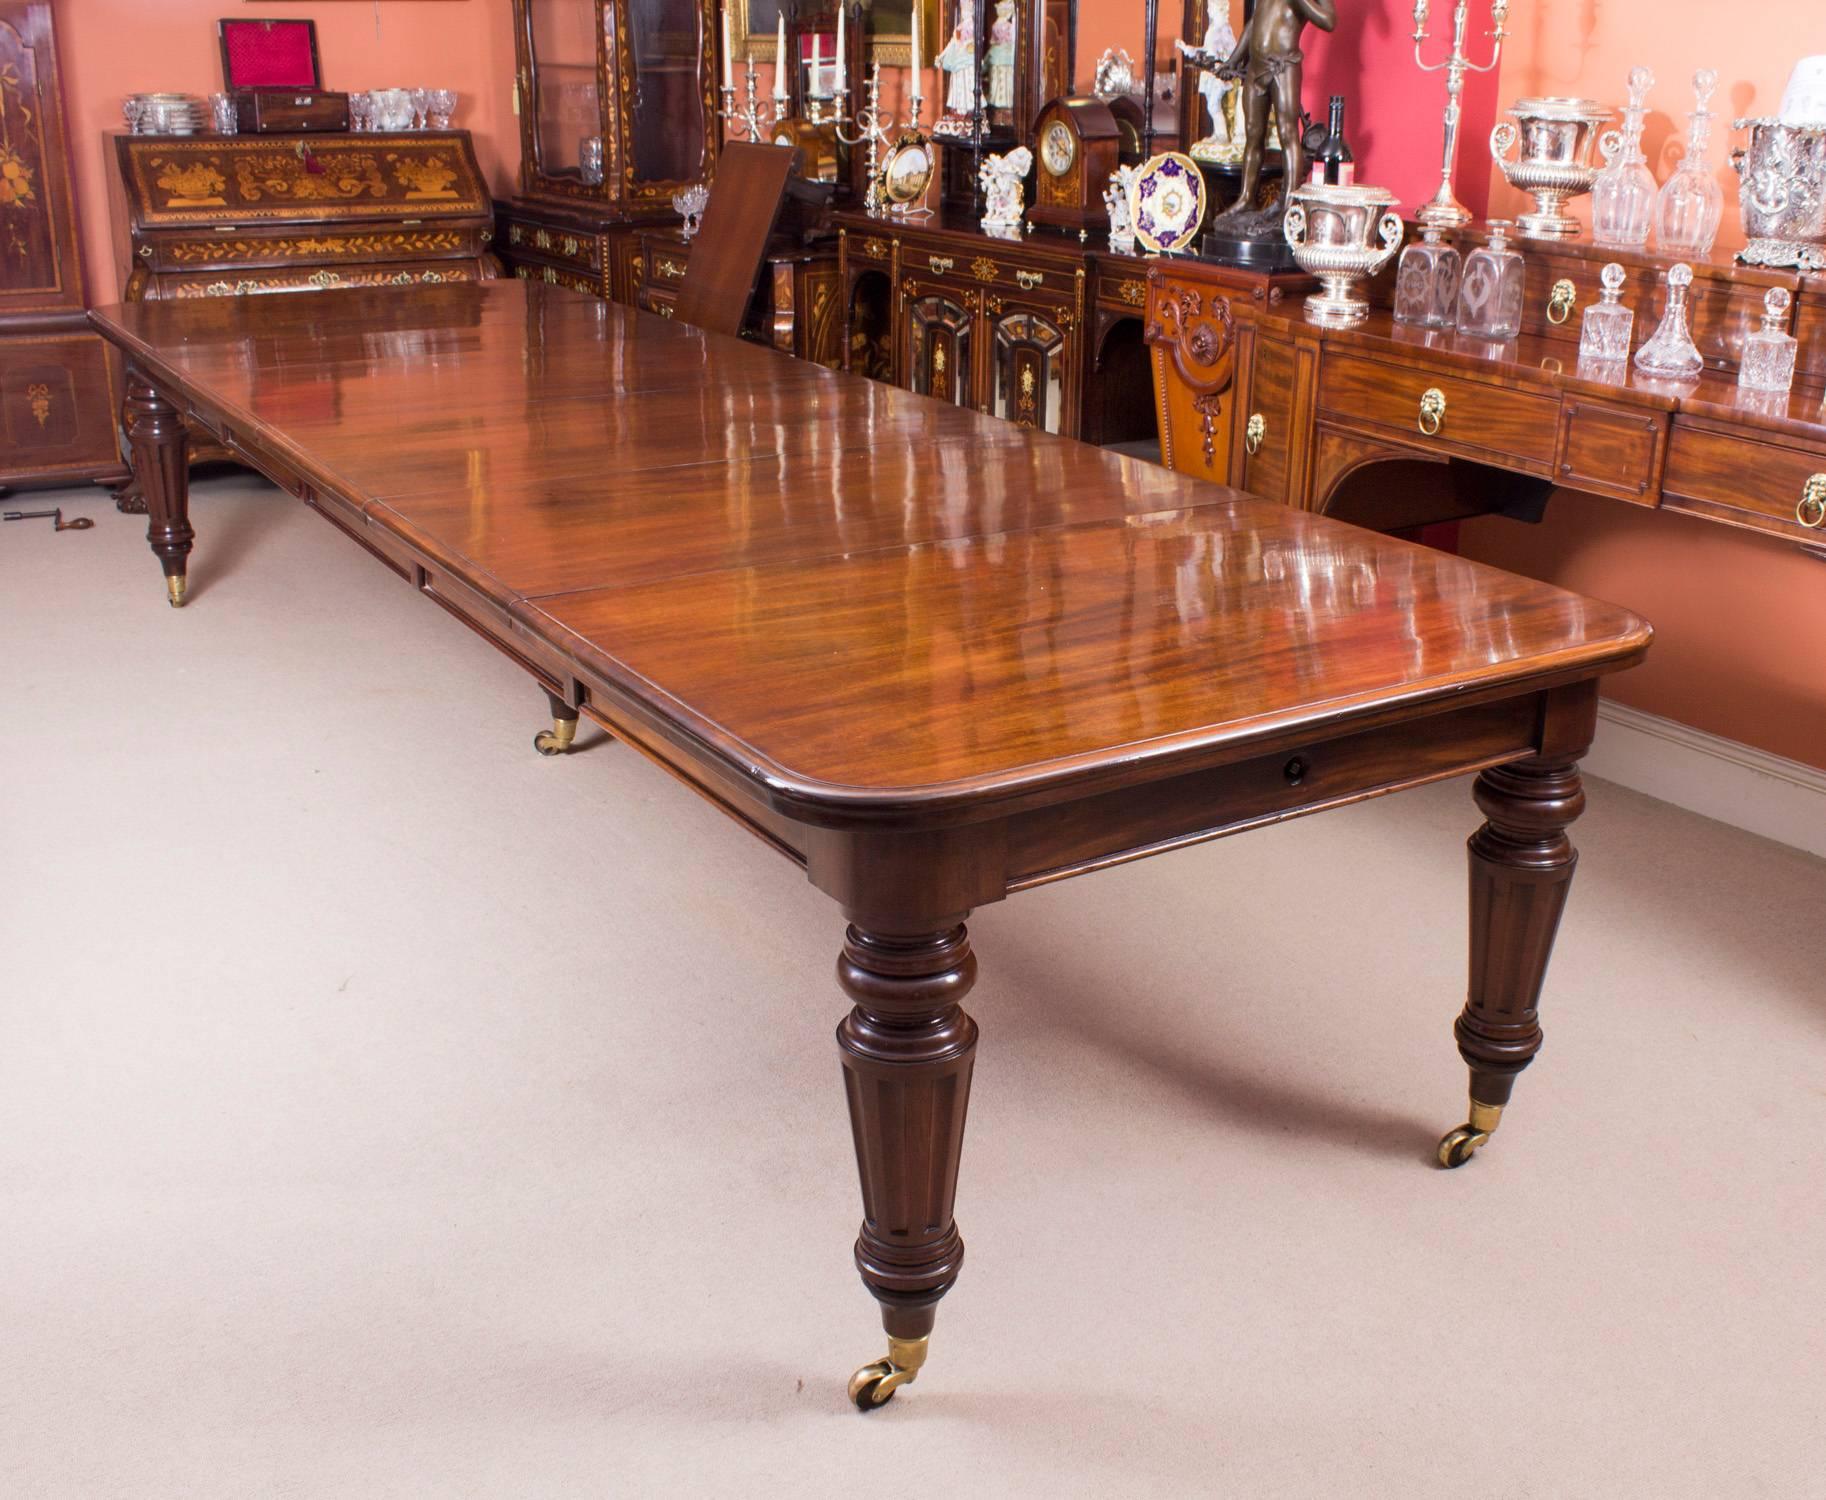 This is a beautiful antique Victorian flame mahogany extending dining table, circa 1870 in date.
This amazing table can sit up to sixteen people in comfort and has been handcrafted from solid mahogany which has a beautiful grain and is in really